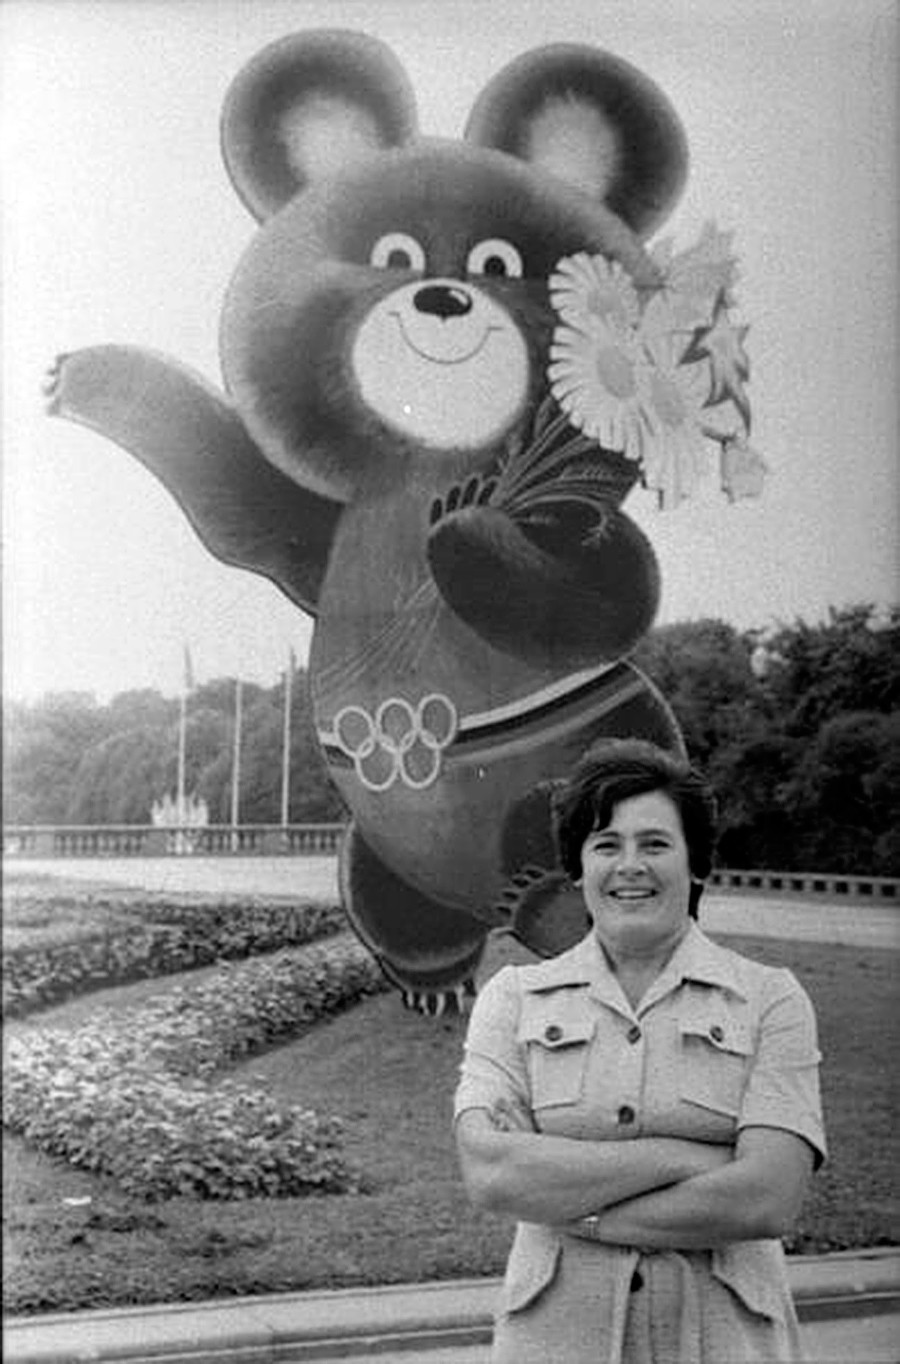 Portrait of a woman in front of Mishka, the mascot of the 1980 Moscow Olympics